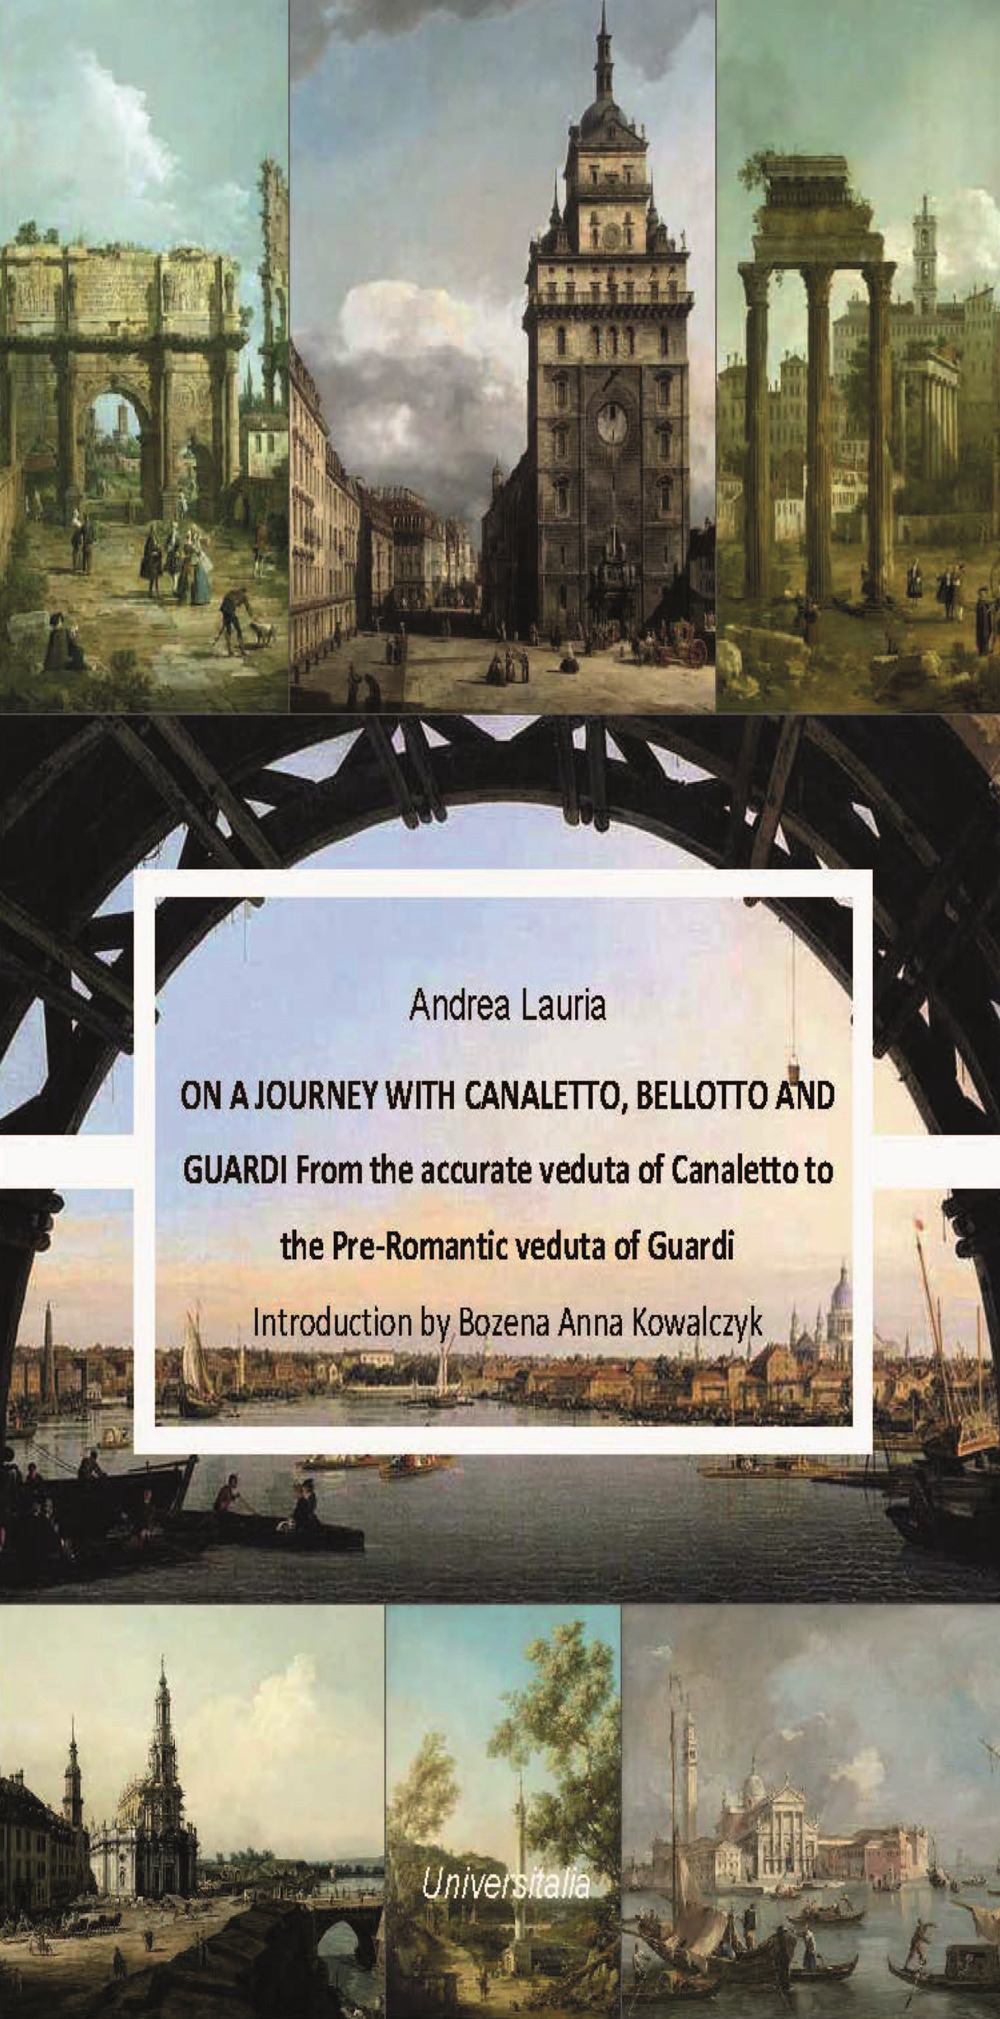 On a journey with Canaletto, Bellotto and Guardi